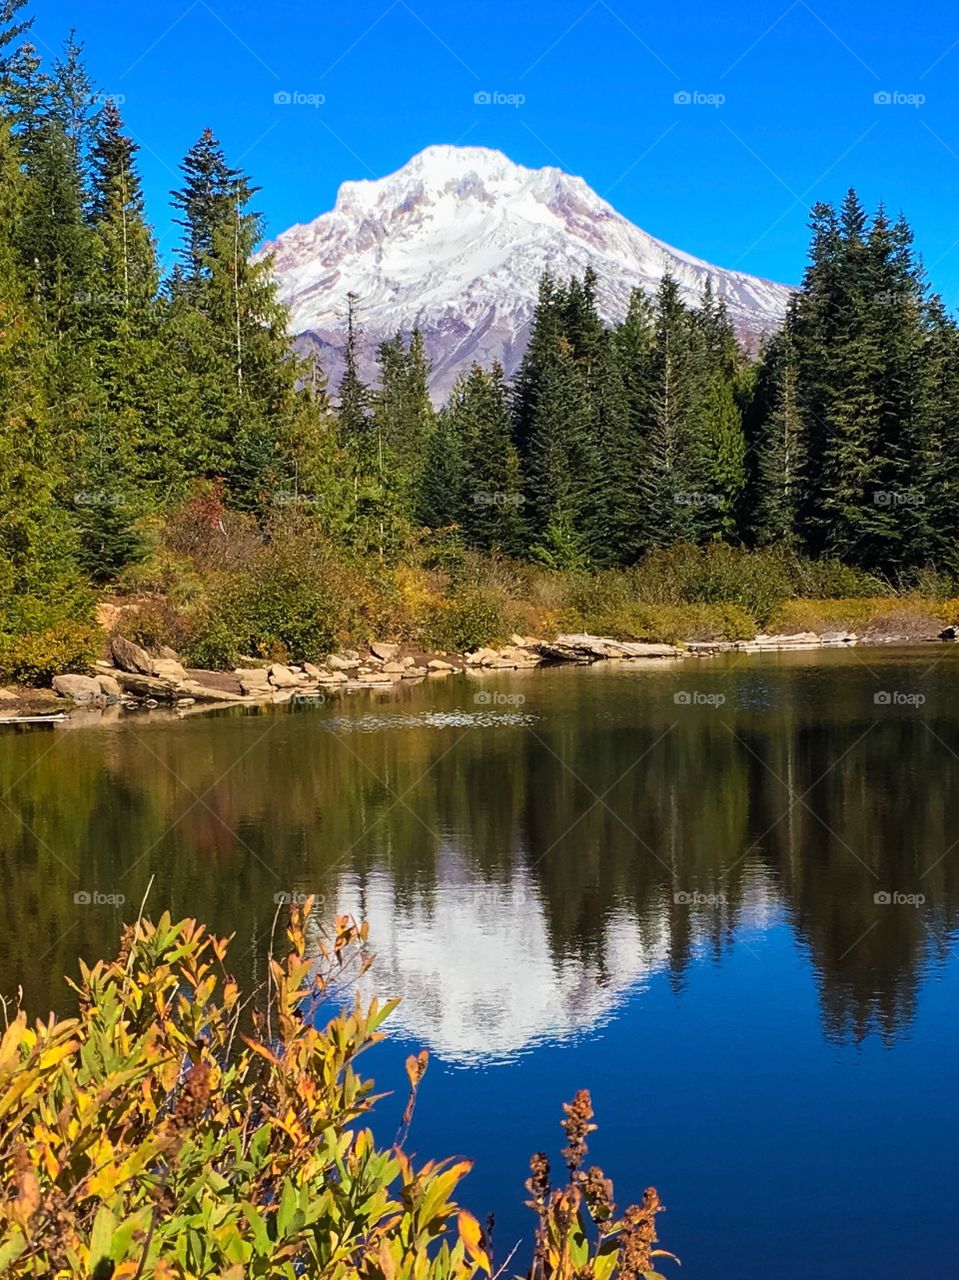 “Reflections on Mirror Lake” Mt Hood is reflected in the serene and picturesque Mirror Lake, Mount Hood National Forest, Oregon.